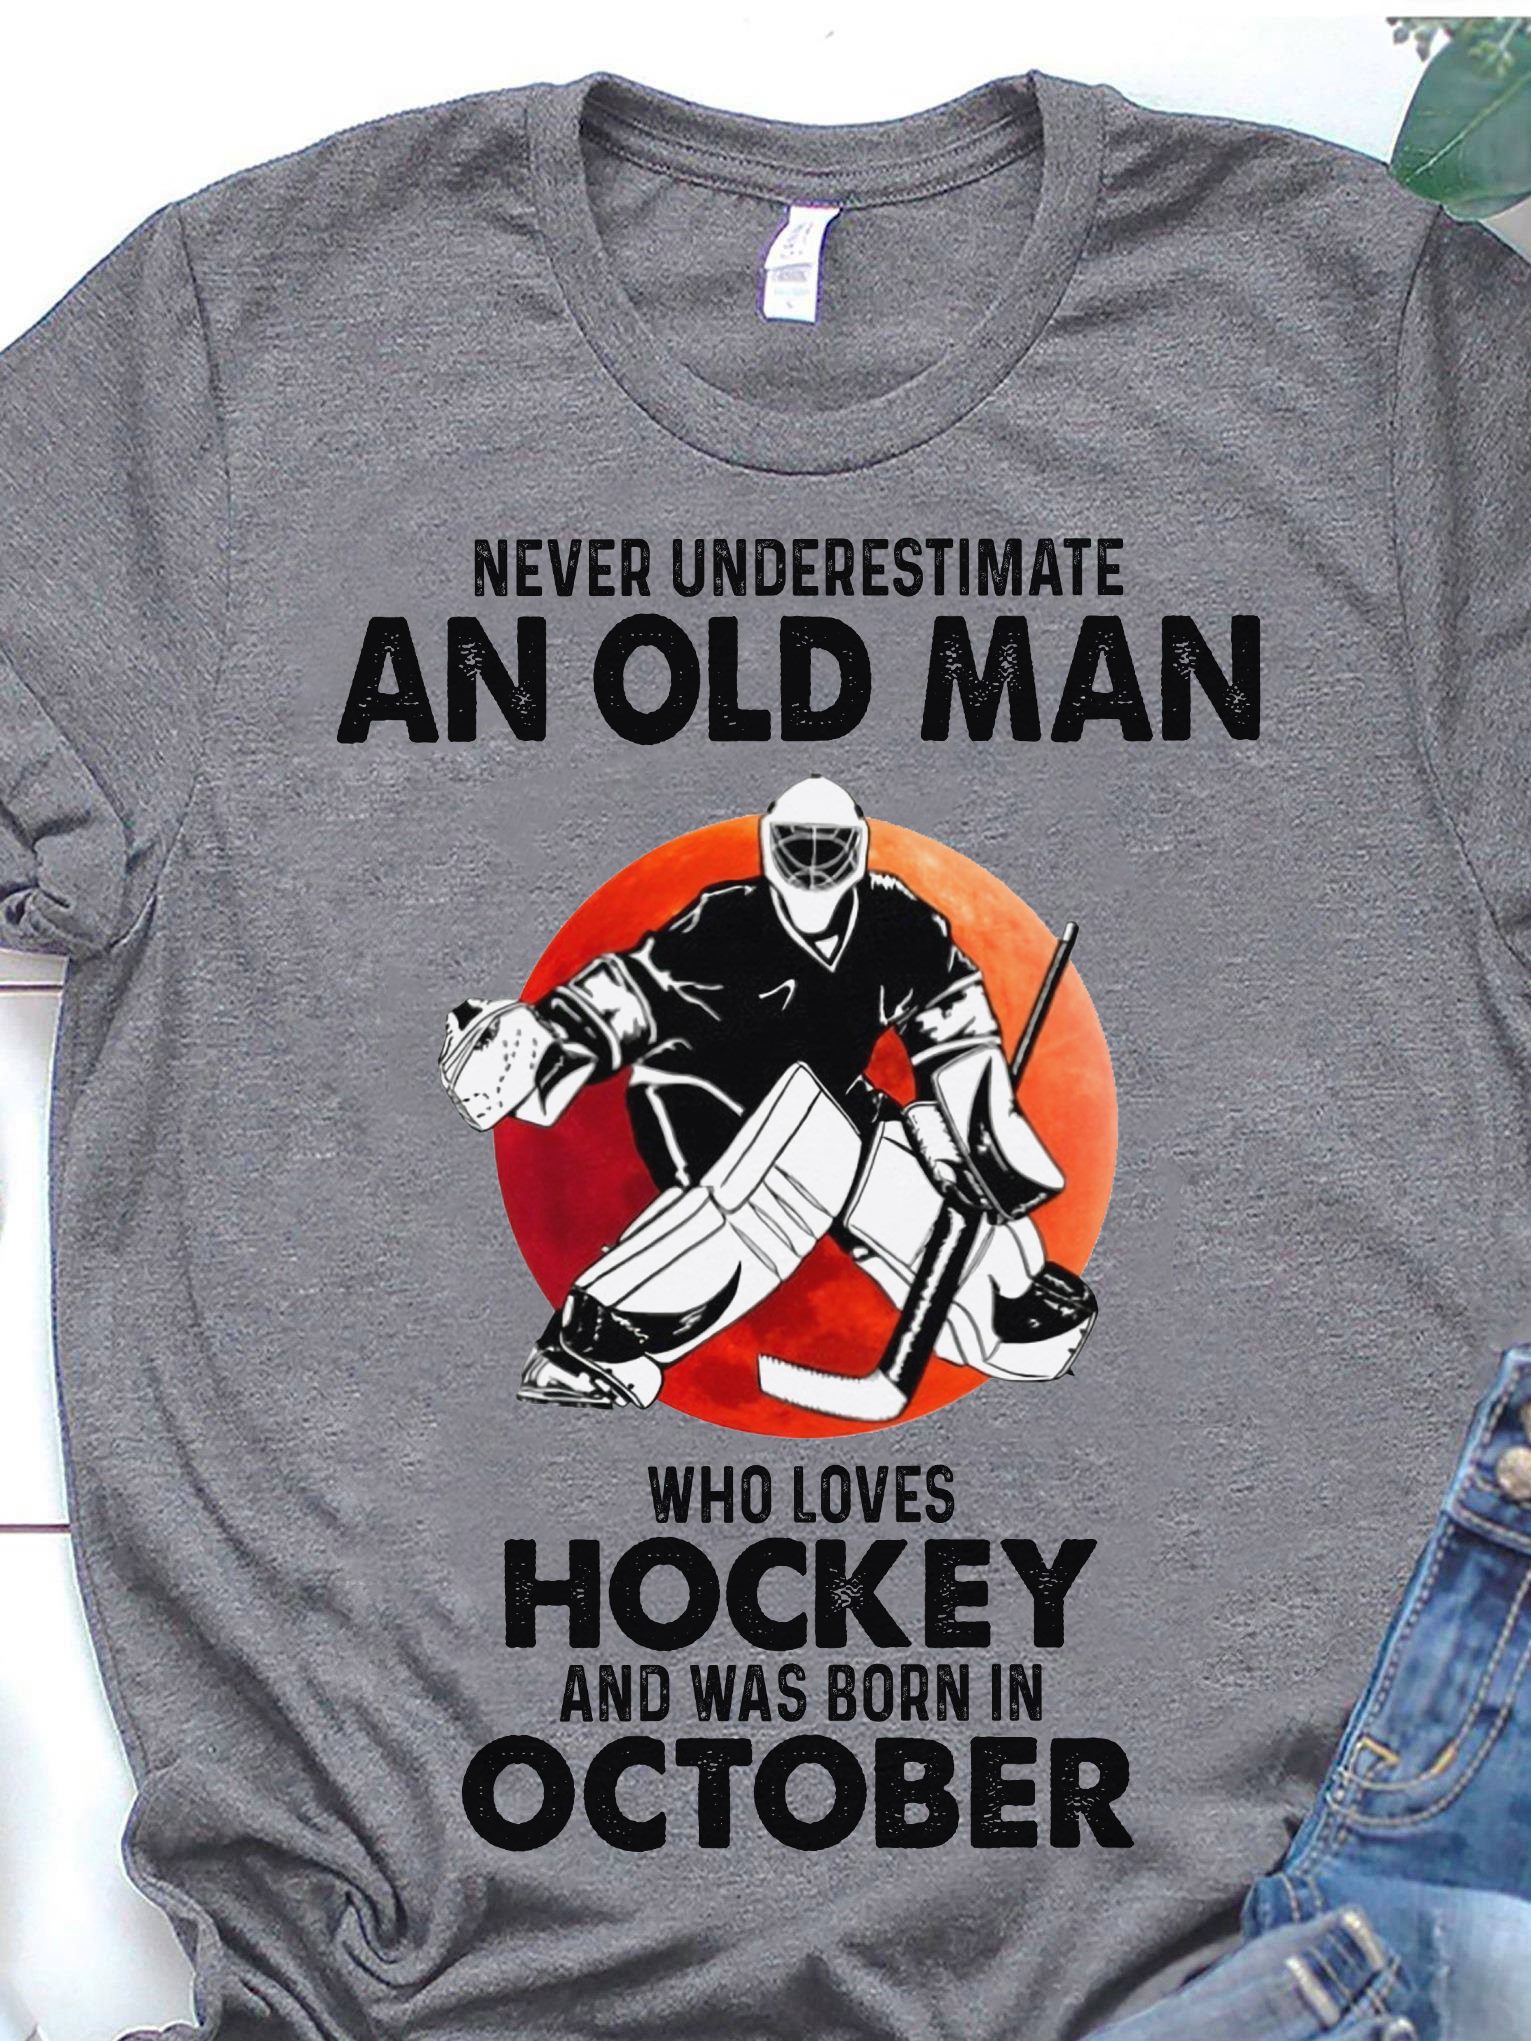 Never underestimate an old man who loves hockey and was born in October